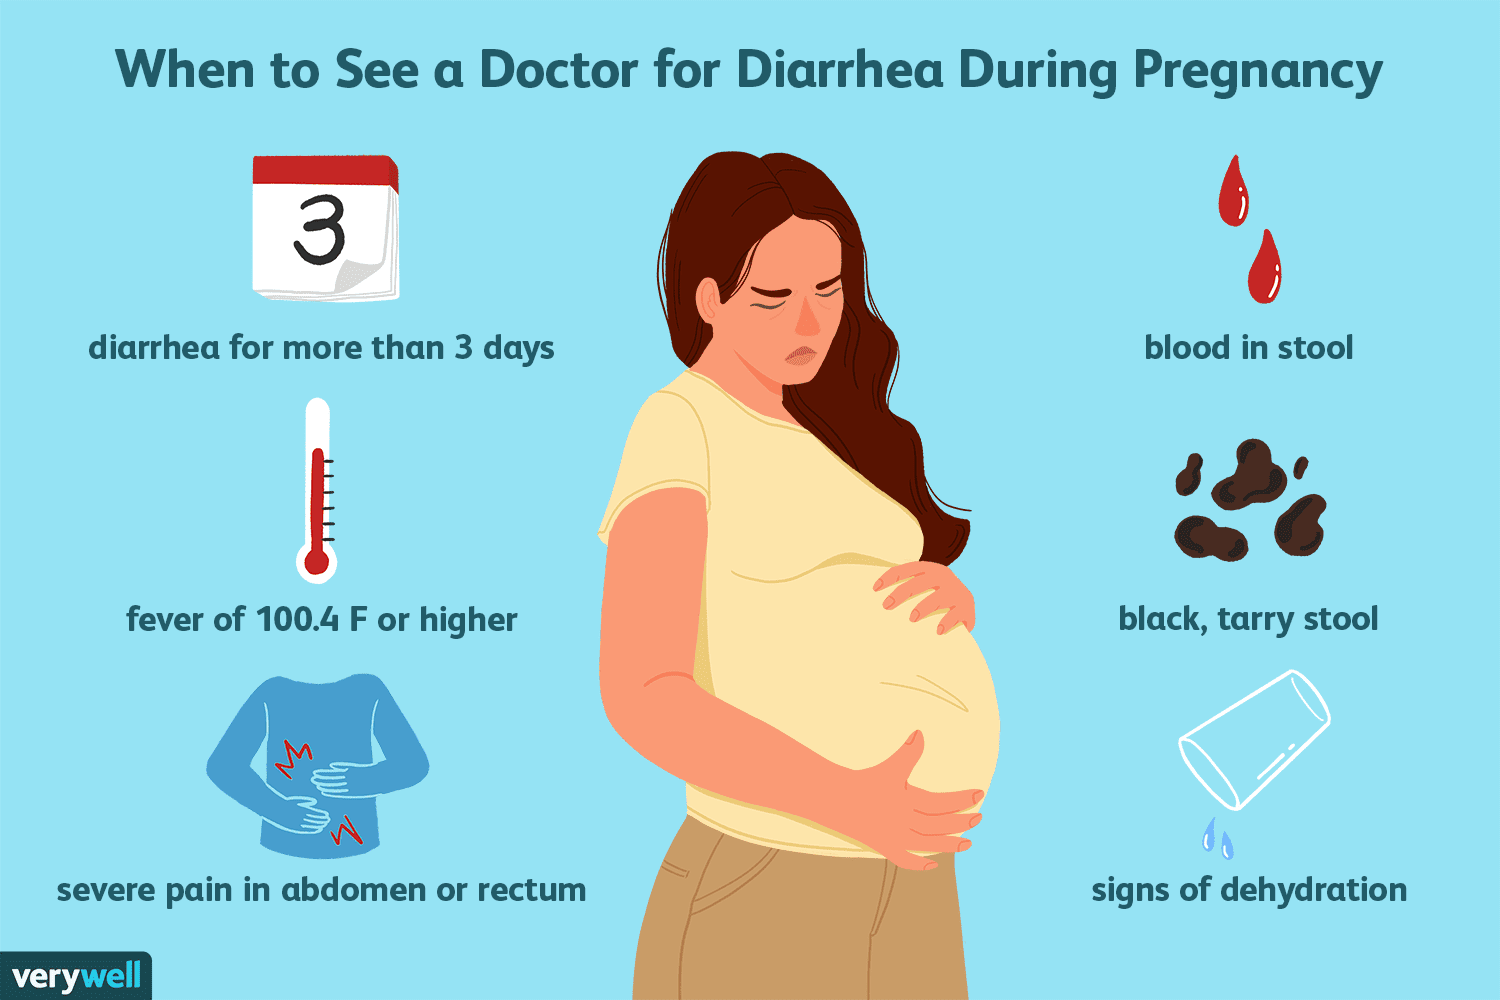 Can Diarrhea During Pregnancy Cause Miscarriage?